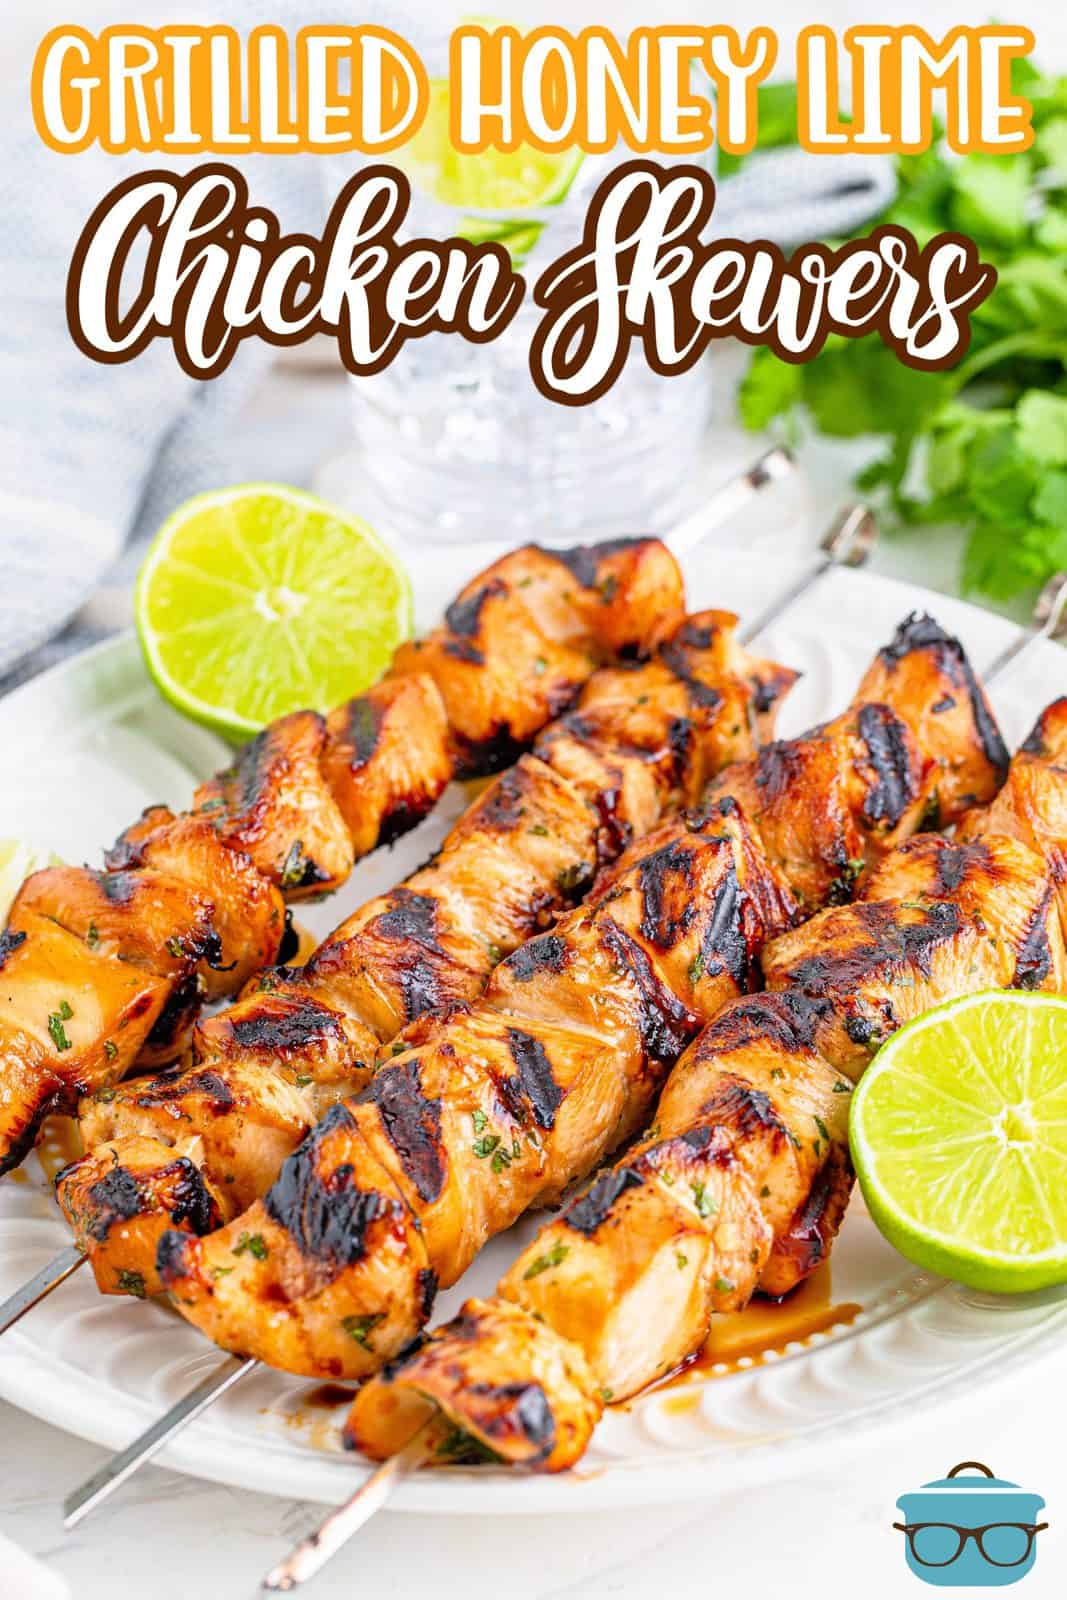 Grilled Honey Lime Chicken Skewers shown on a white plate with sliced fresh limes. 